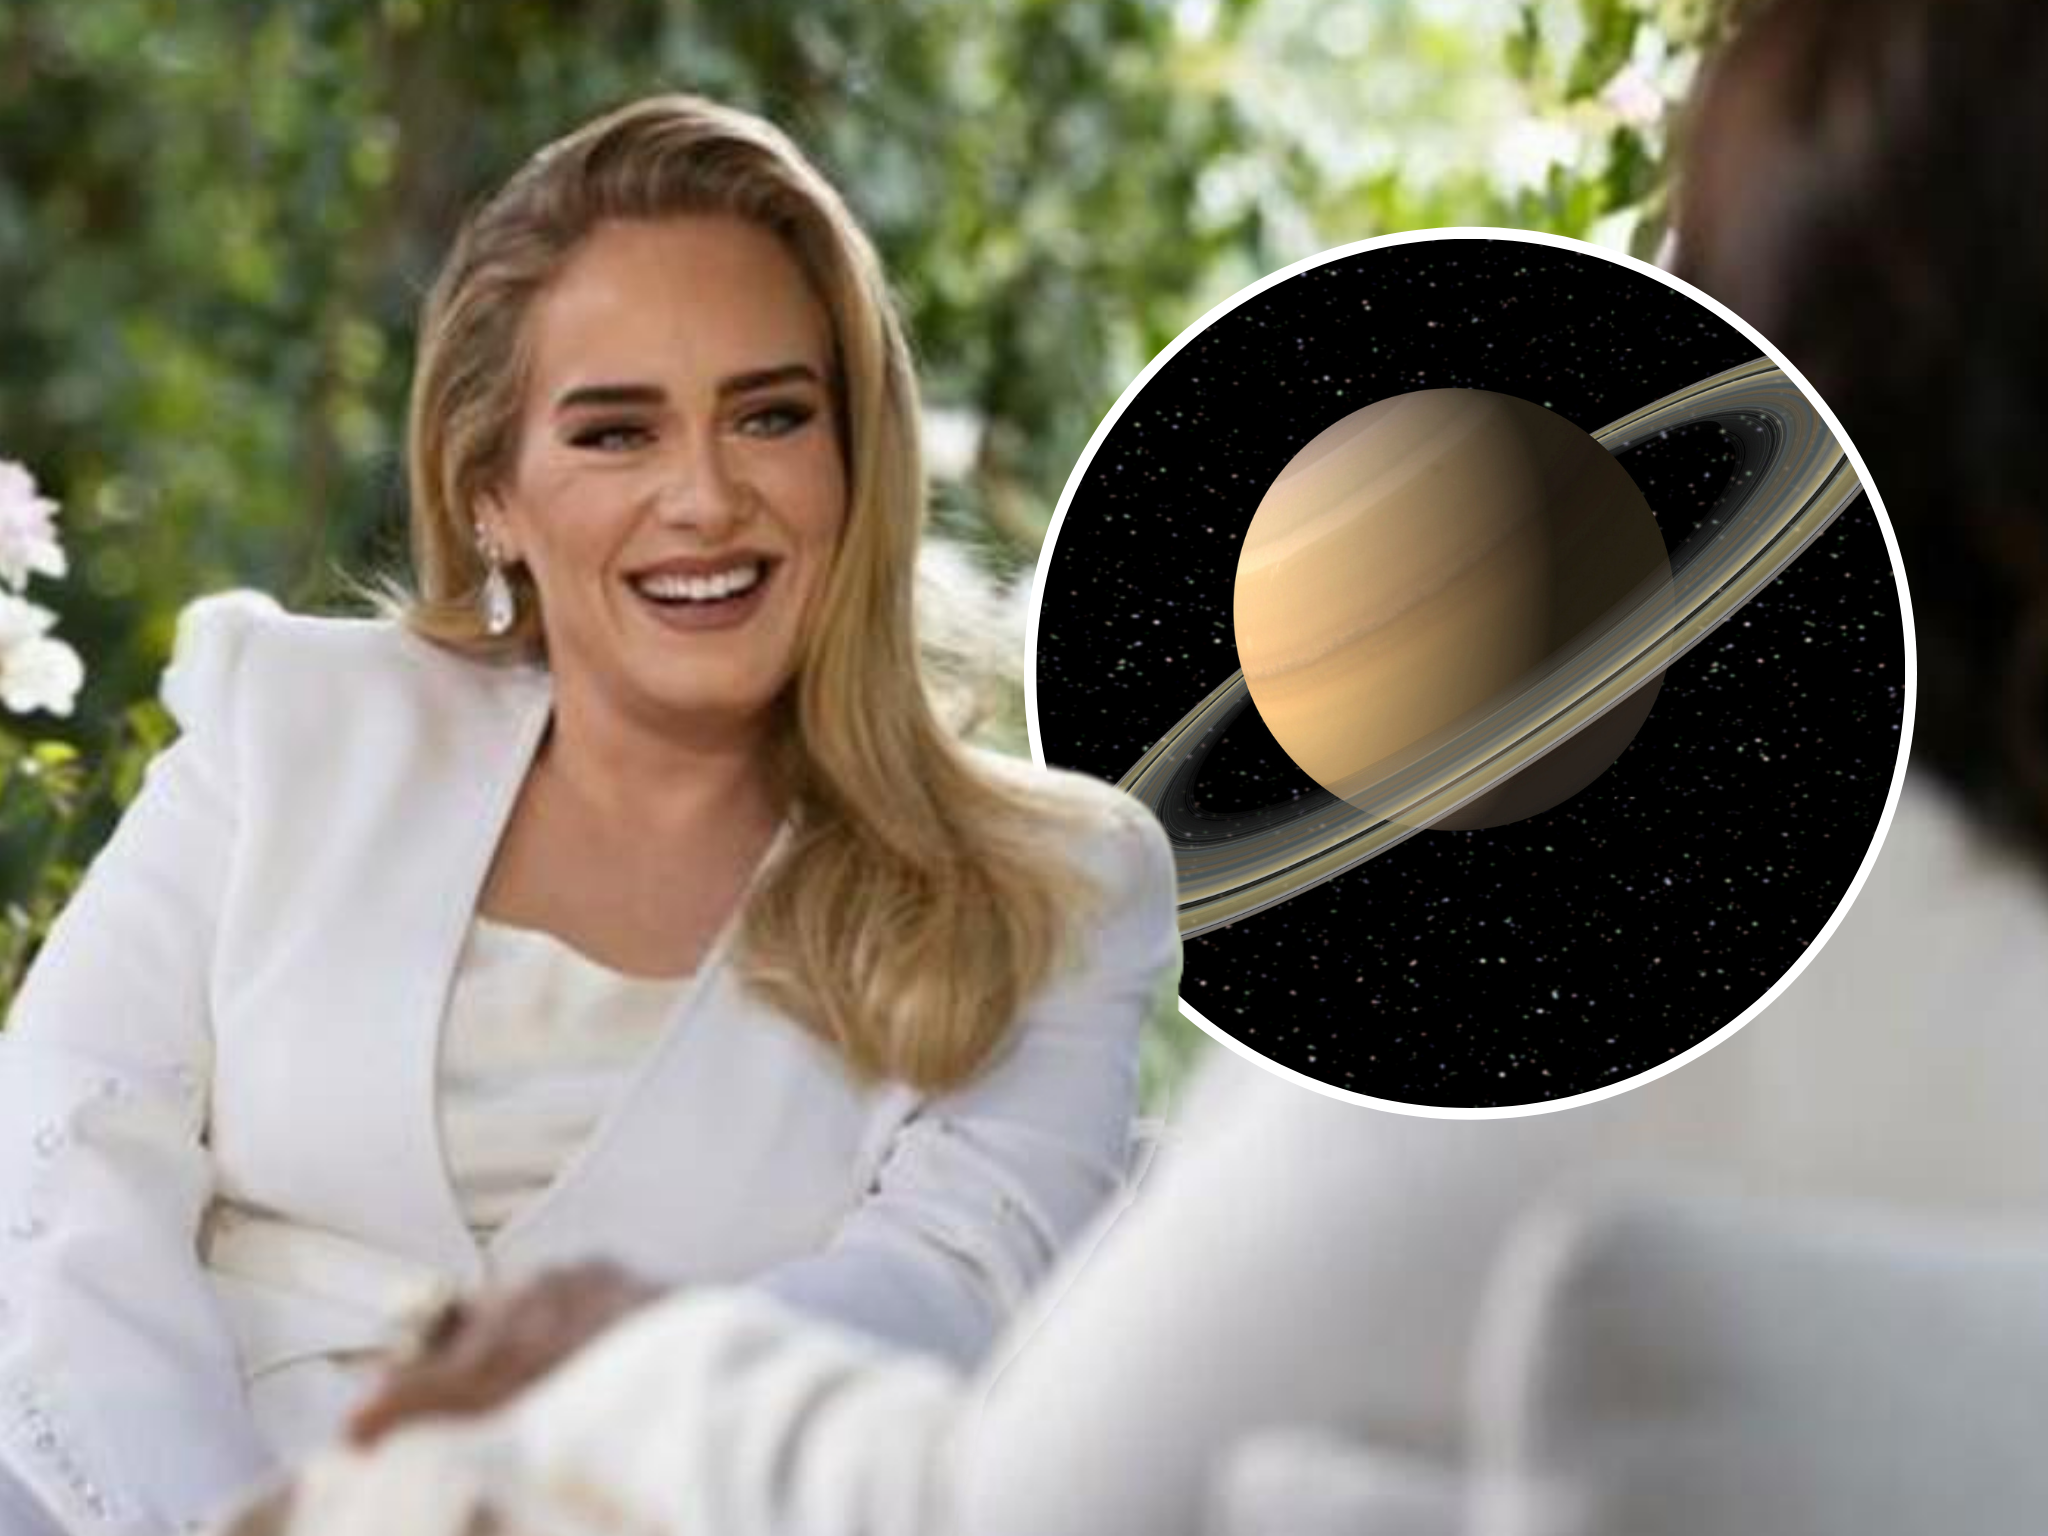 Why does adele have a tattoo of saturn